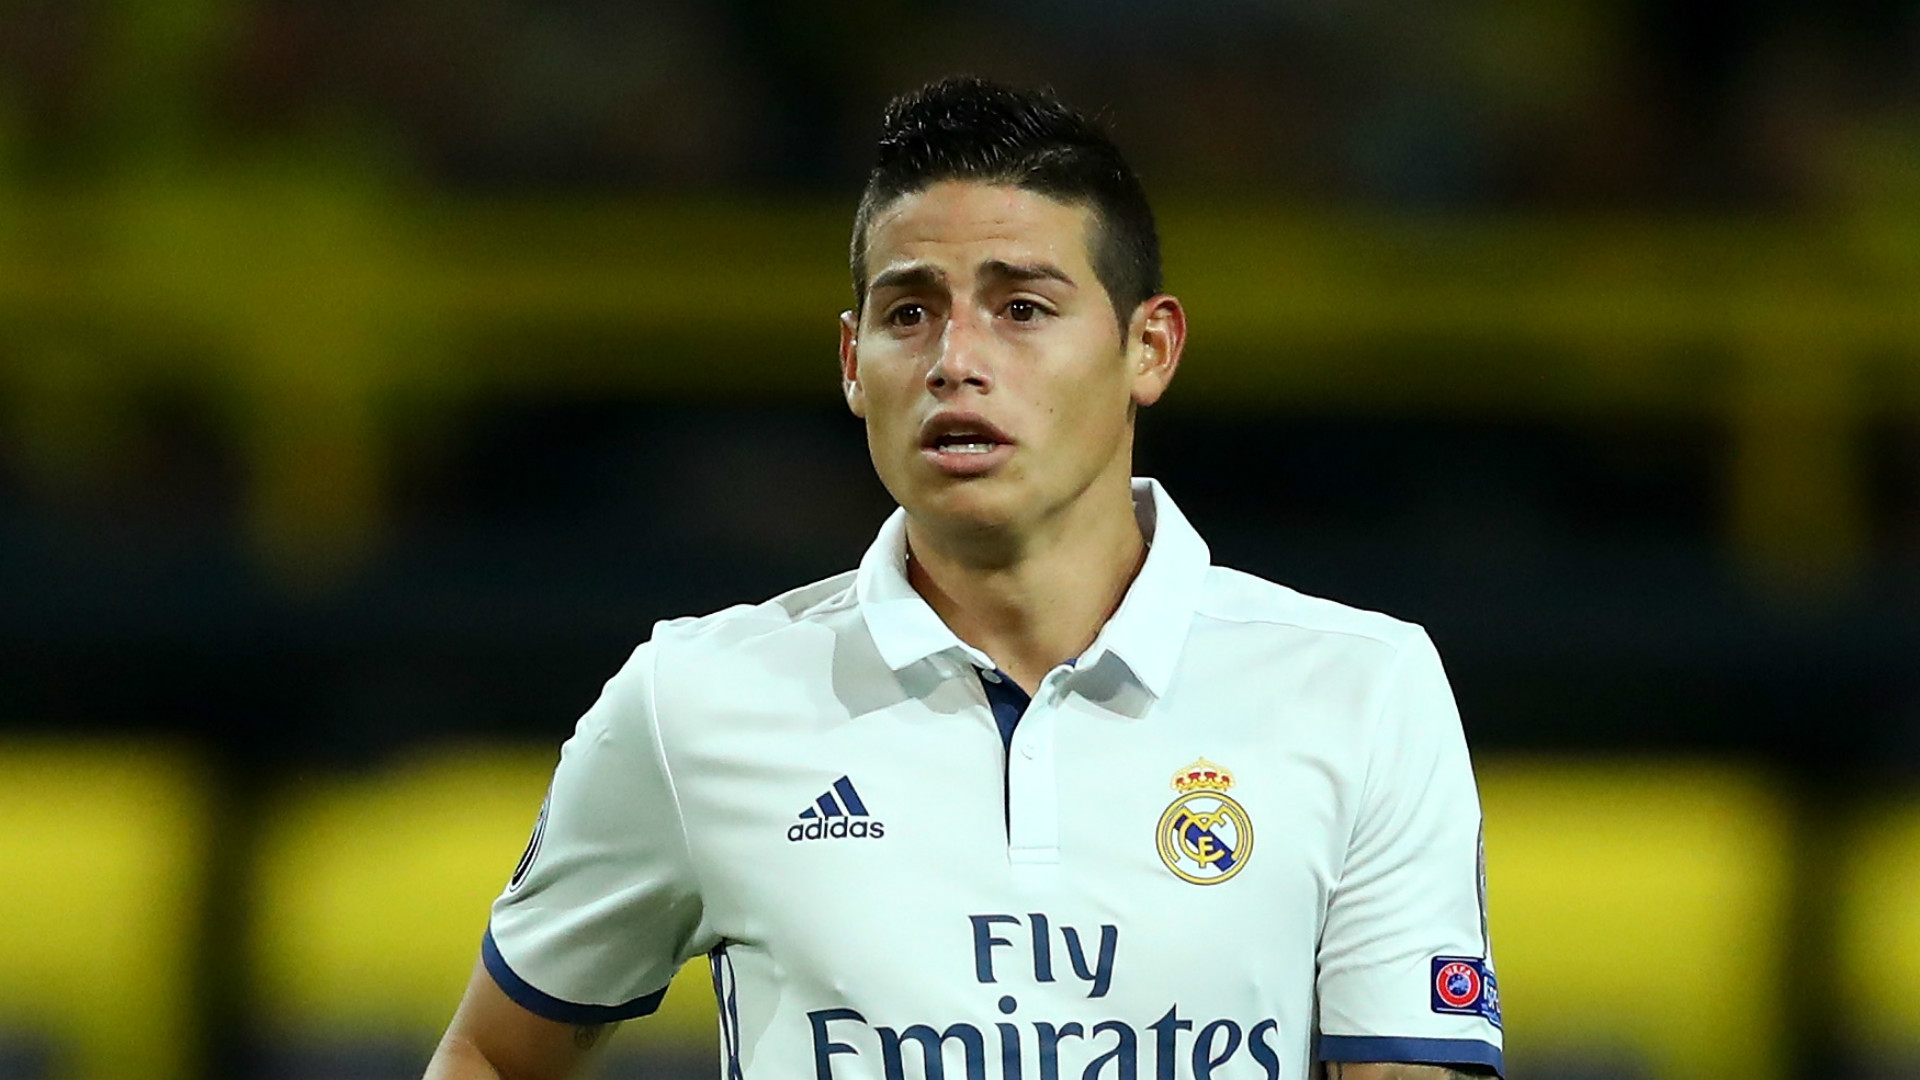 1920x1080 James' Madrid career looks over as transfer ban is reduced